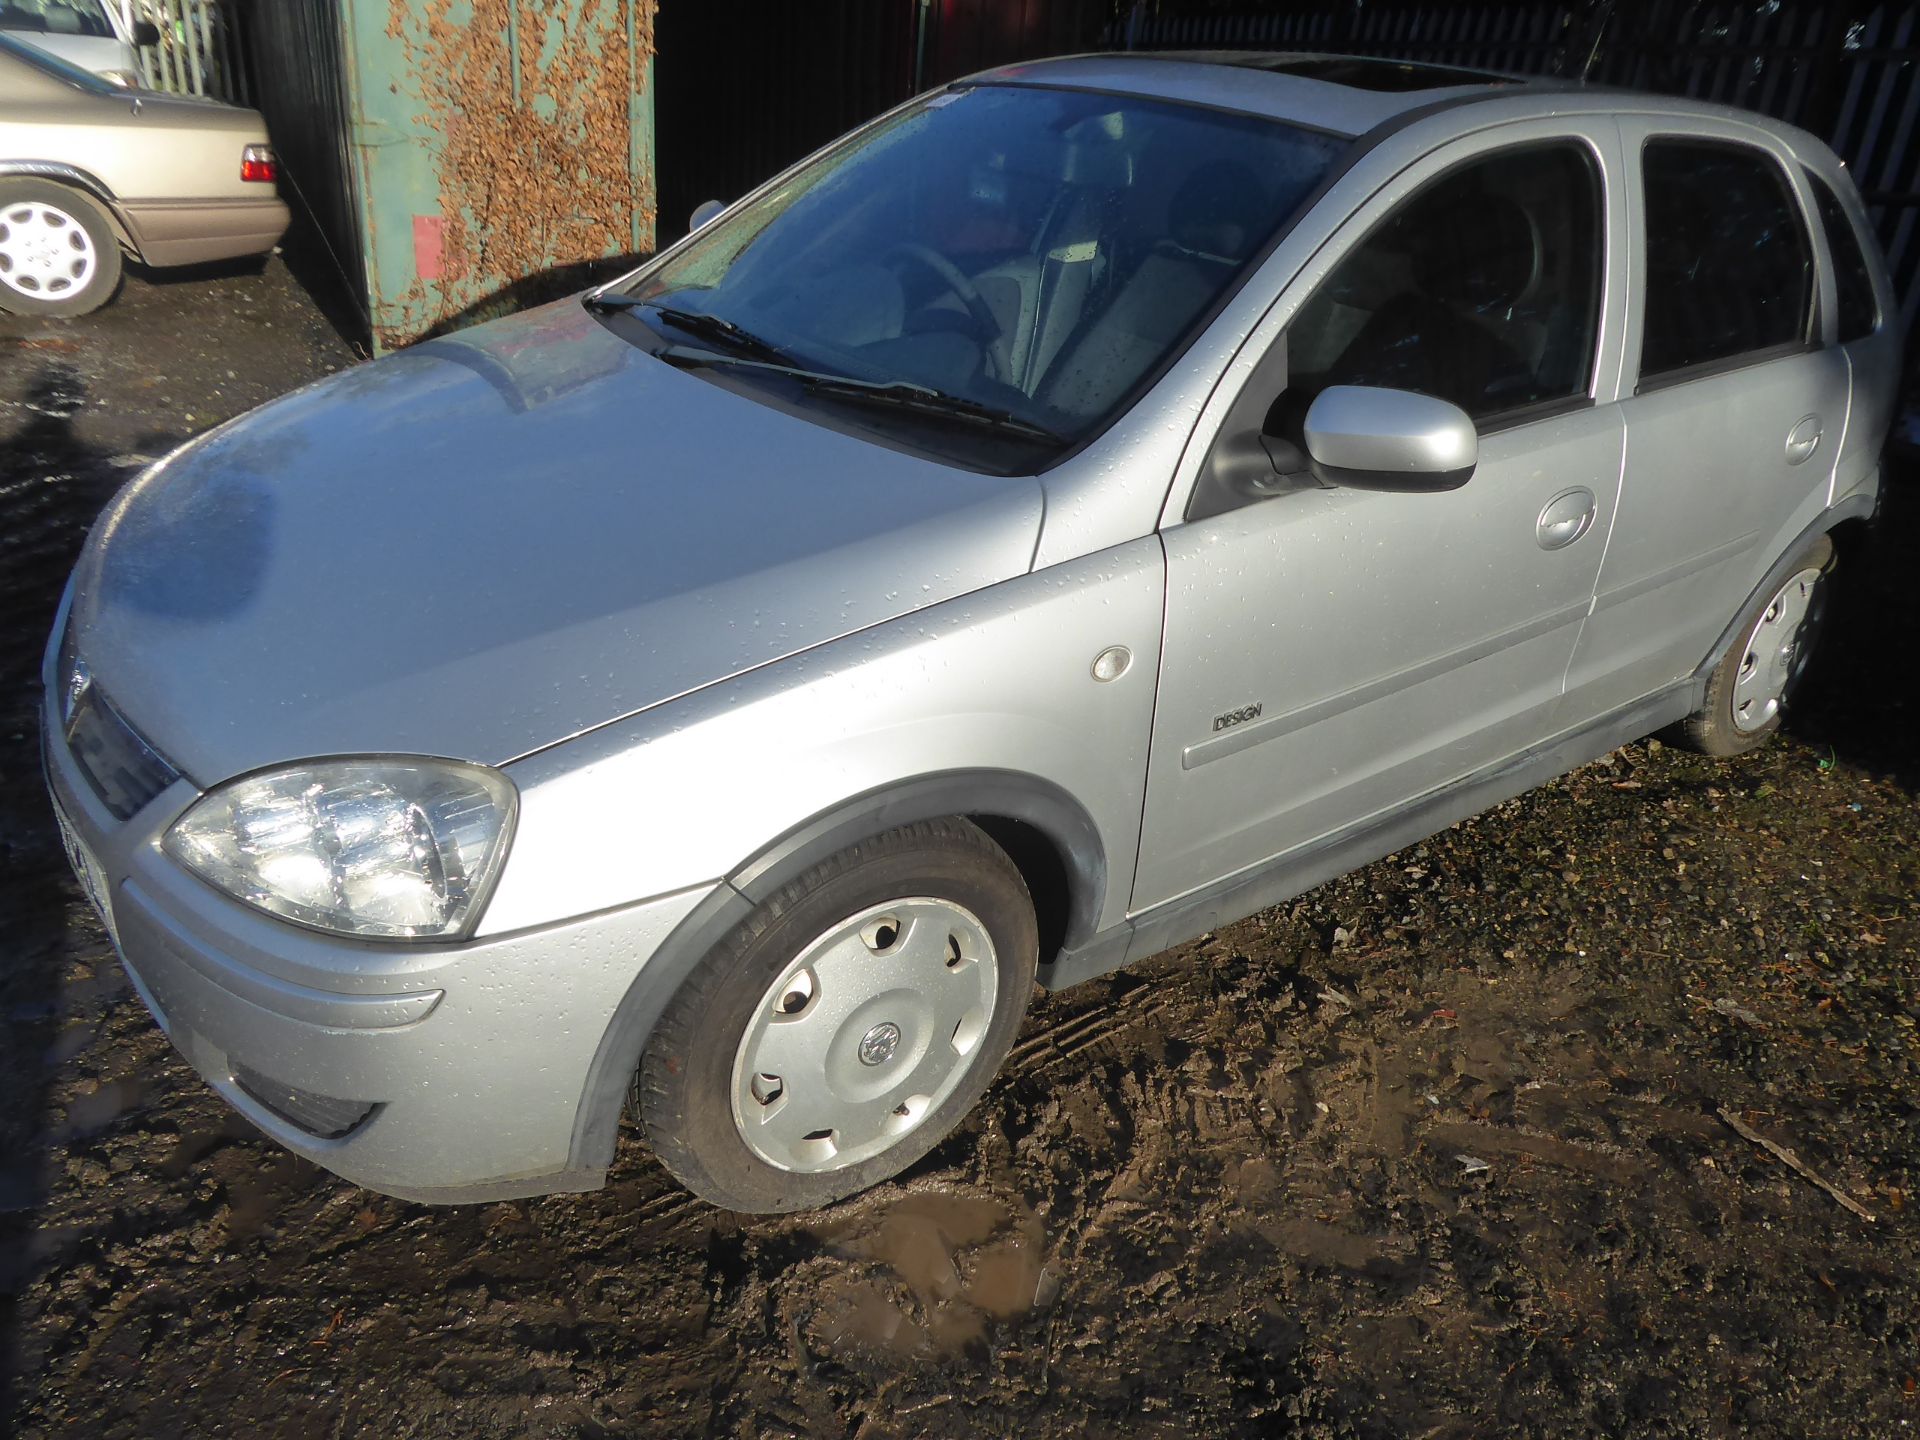 2005 Vauxhall Corsa 1.2 Design Twin Sport, 5 door hatchback, stored for over 5 years, mileage approx